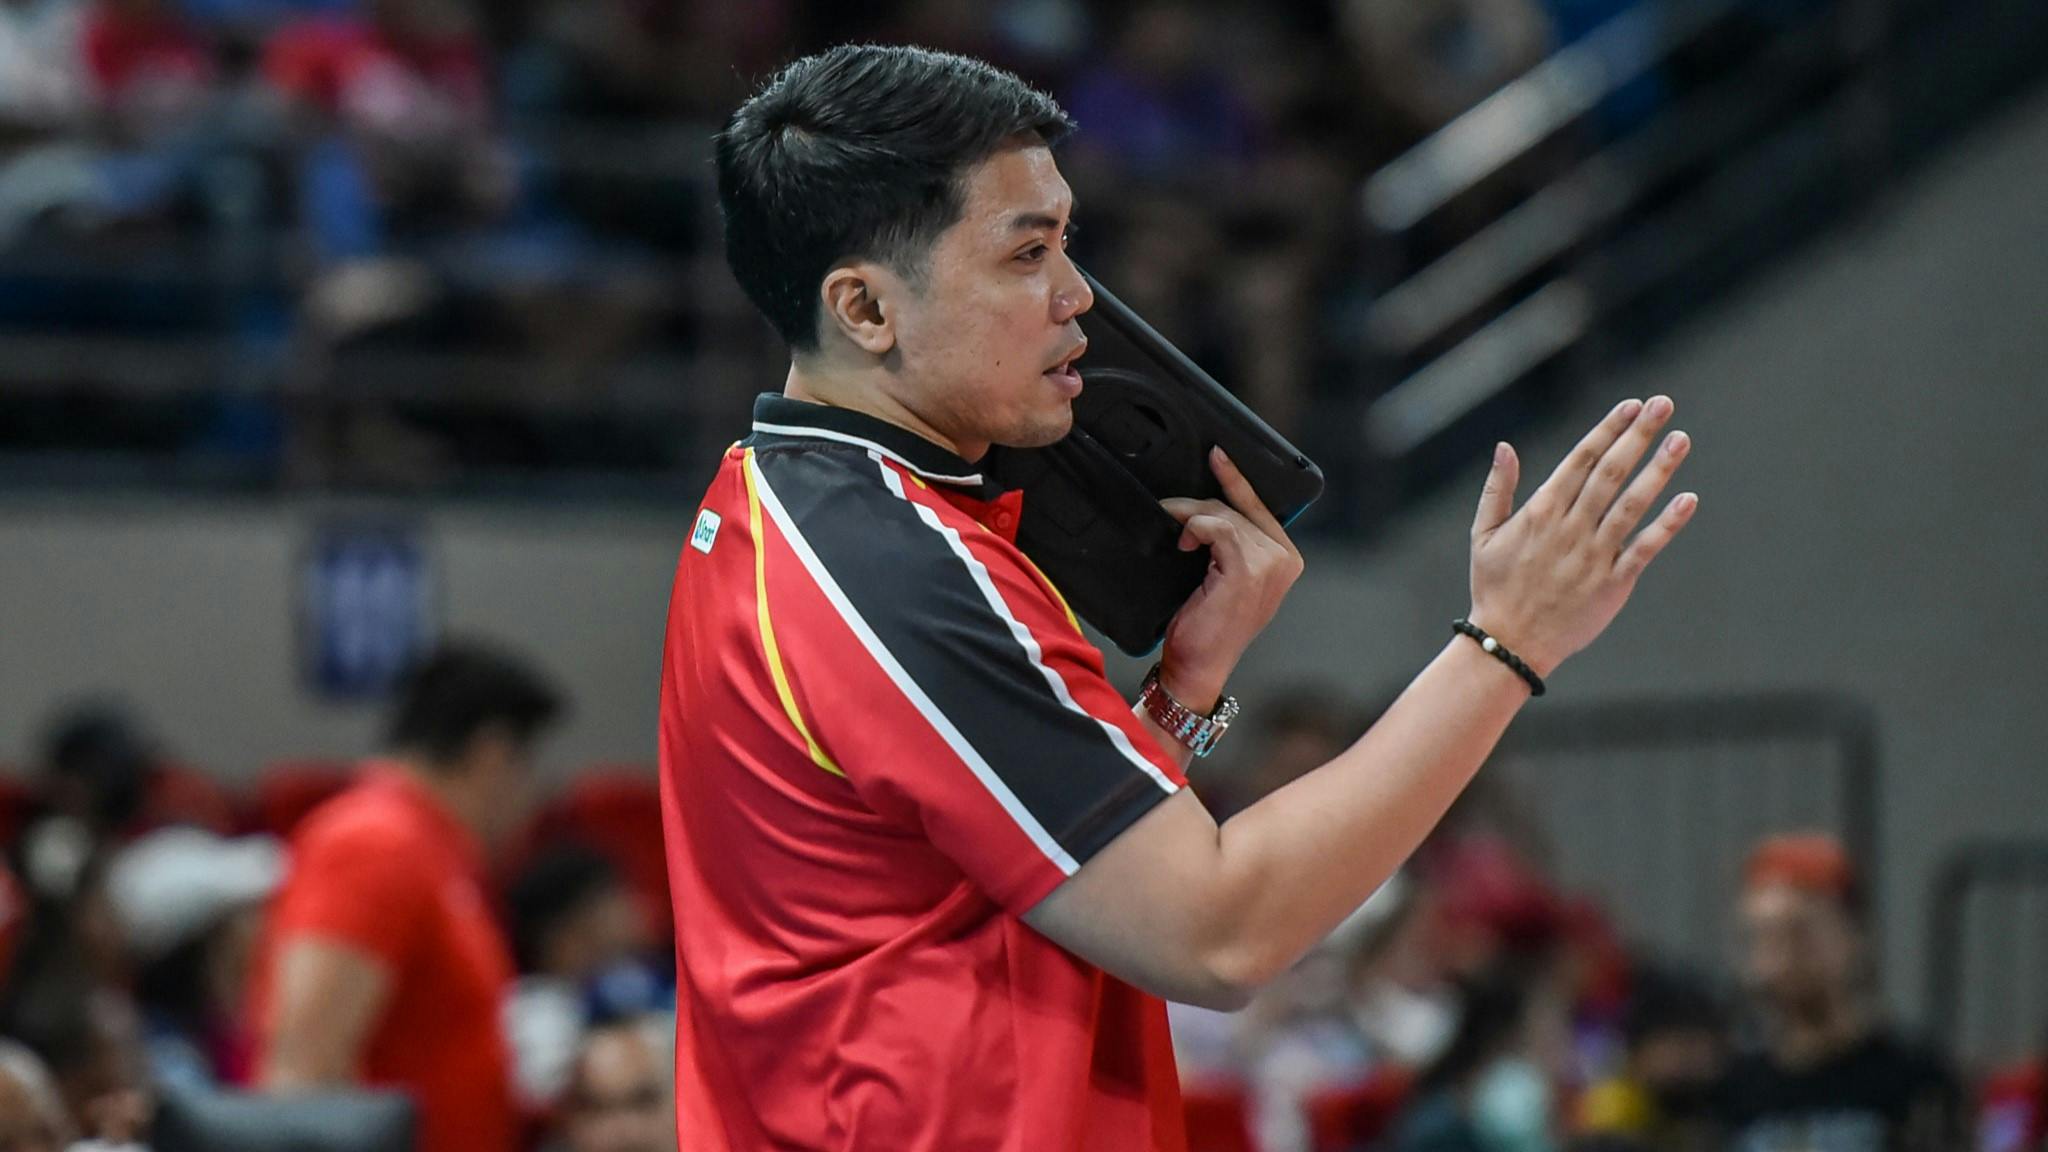 PVL: Shortened Holy Week break pays off for coach Rald Ricafort and PLDT High Speed Hitters